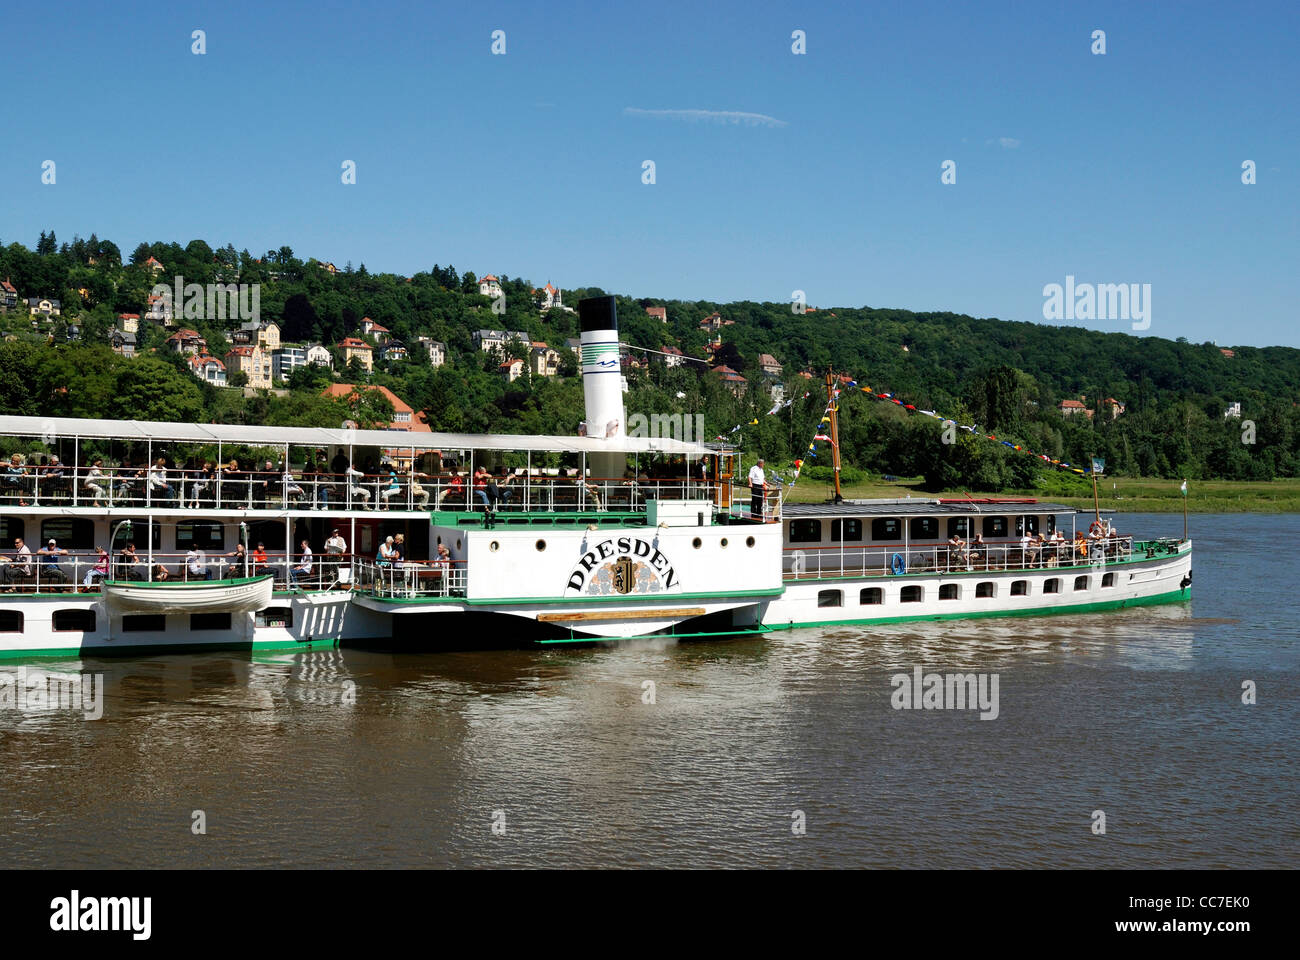 Historical paddle steamer on the river Elbe in Dresden. Stock Photo